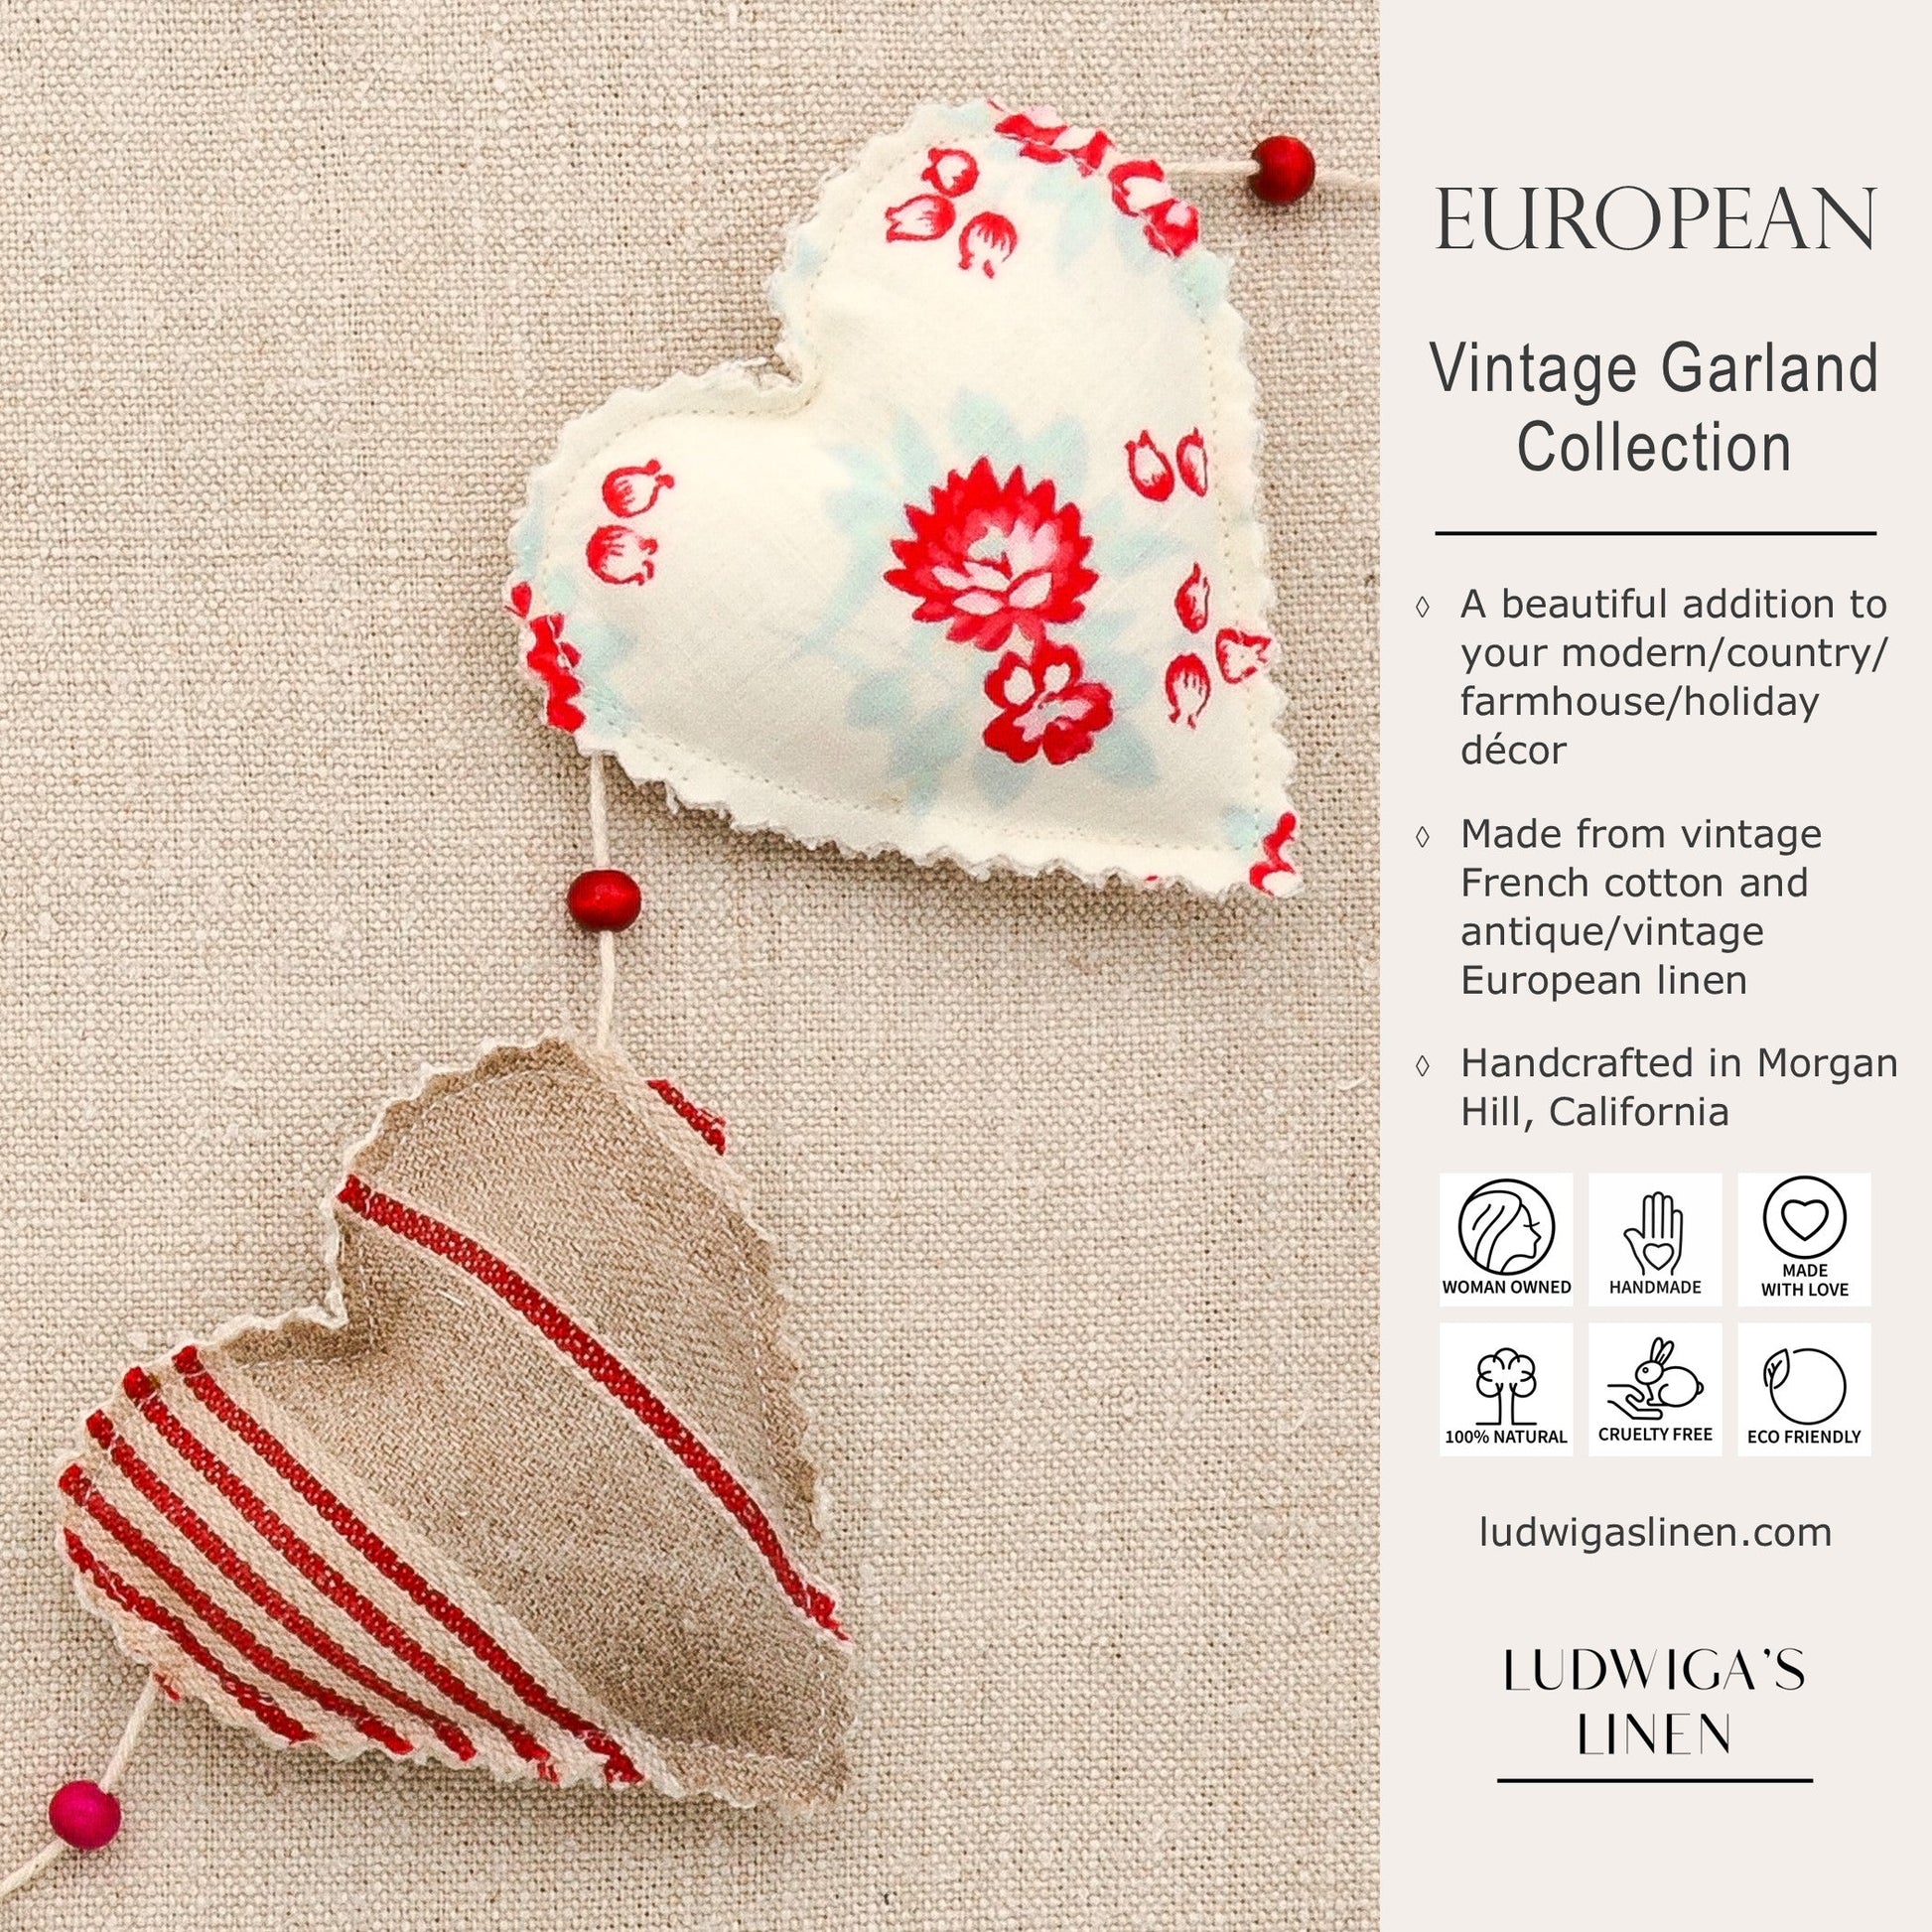 Focus on two hearts in this vintage French fabric garland, white cotton twine and wooden beads between hearts